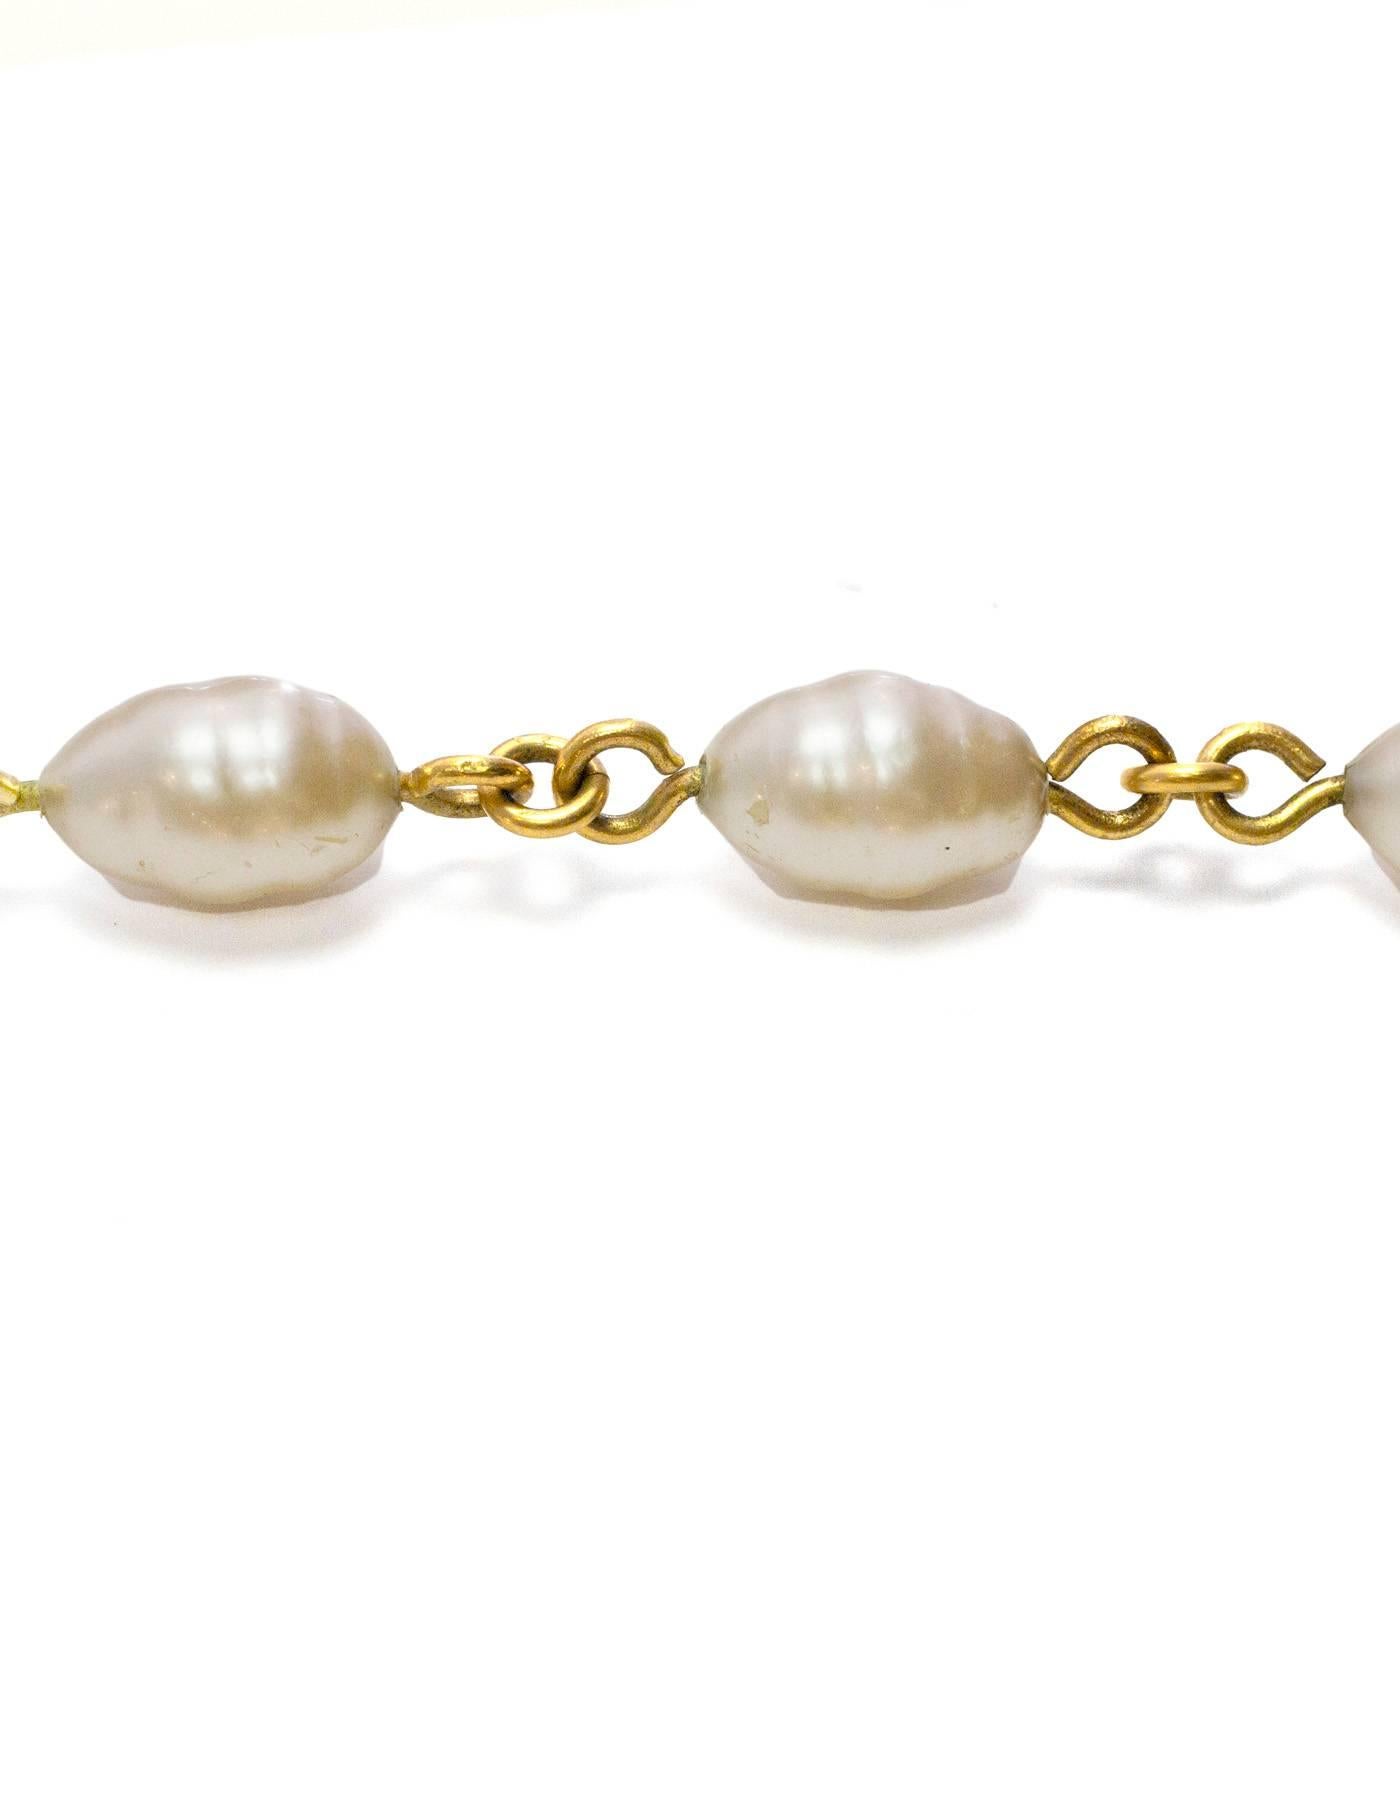 Women's Chanel 1994 Vintage Ivory Faux Pearl & Goldtone Necklace